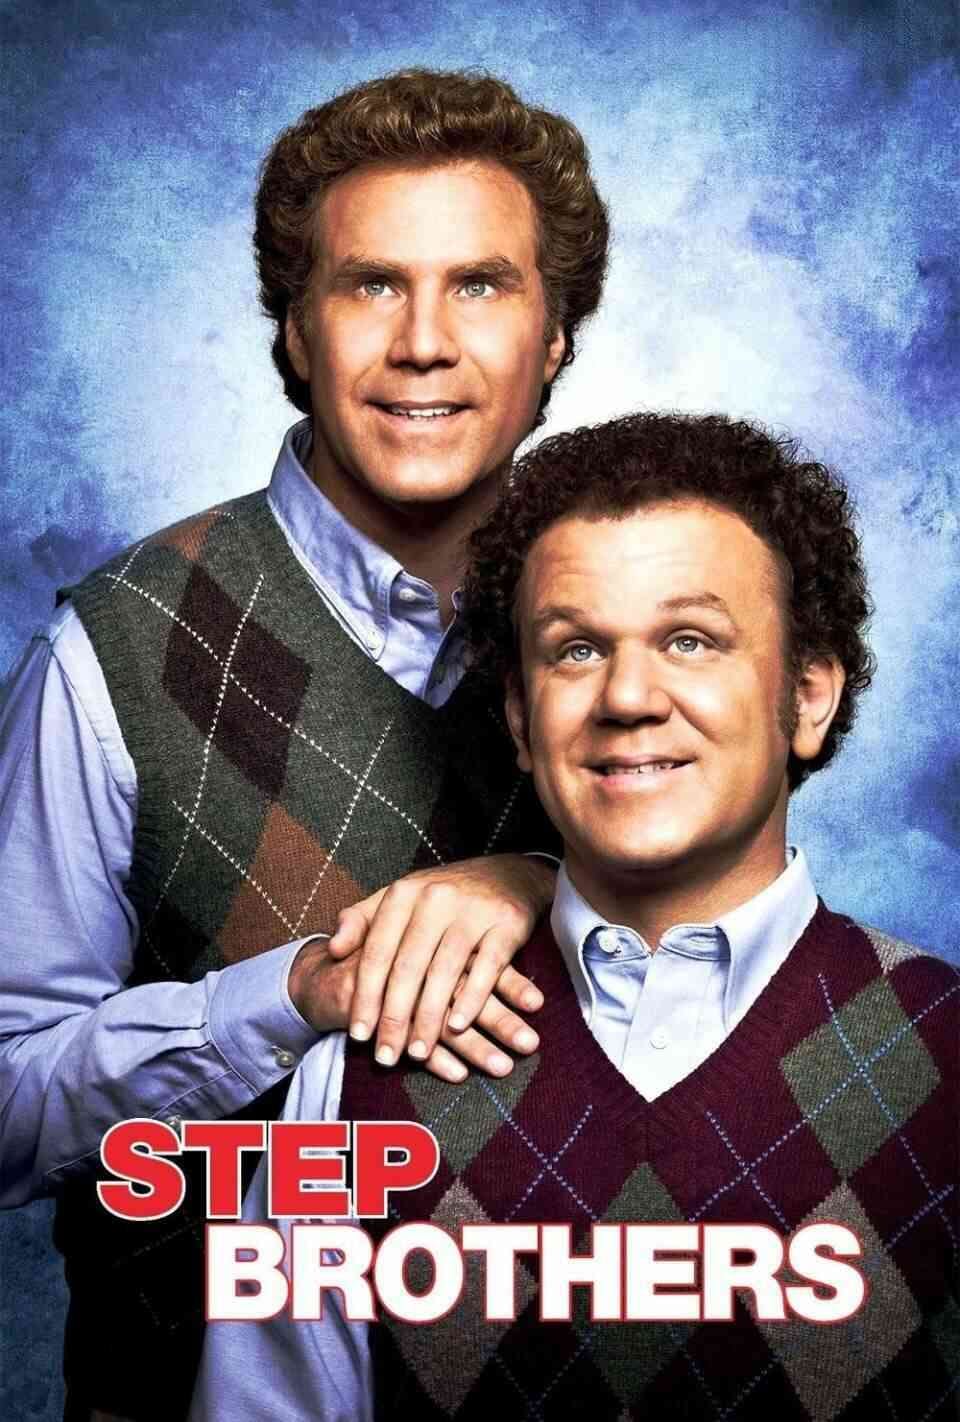 Read Step Brothers screenplay.